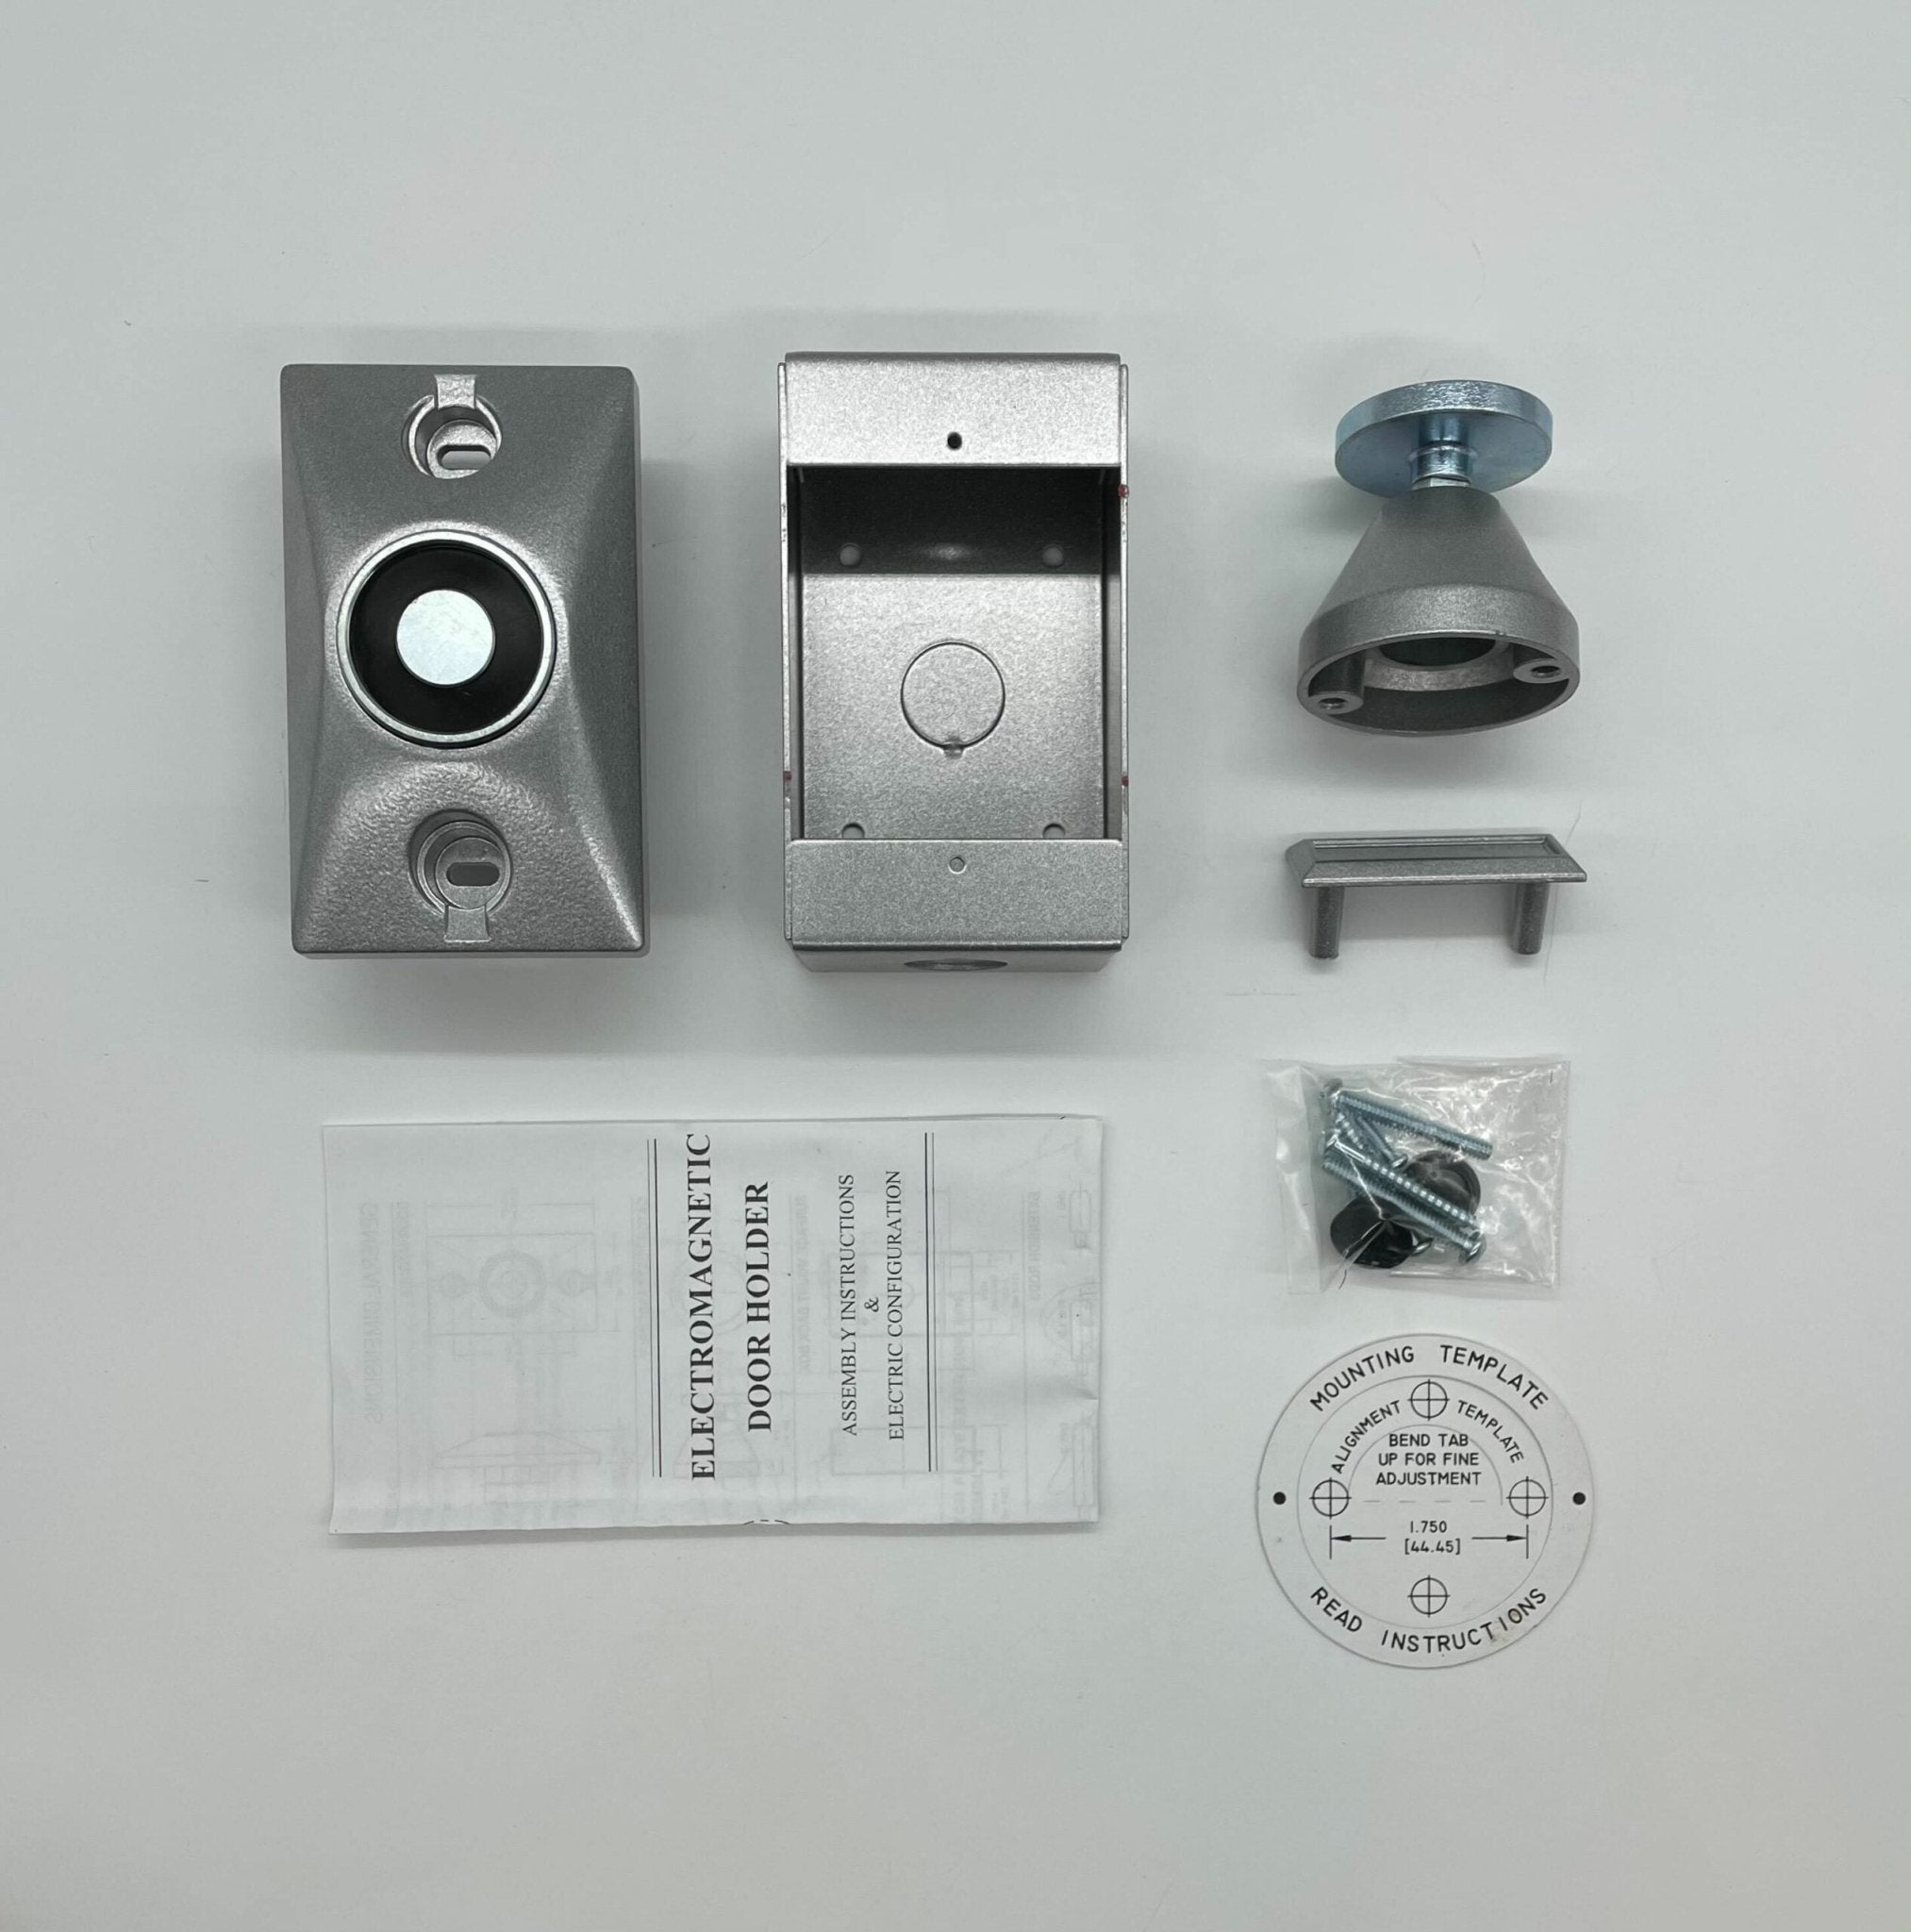 RSG DH1224SPC Magnetic Door Holder - The Fire Alarm Supplier